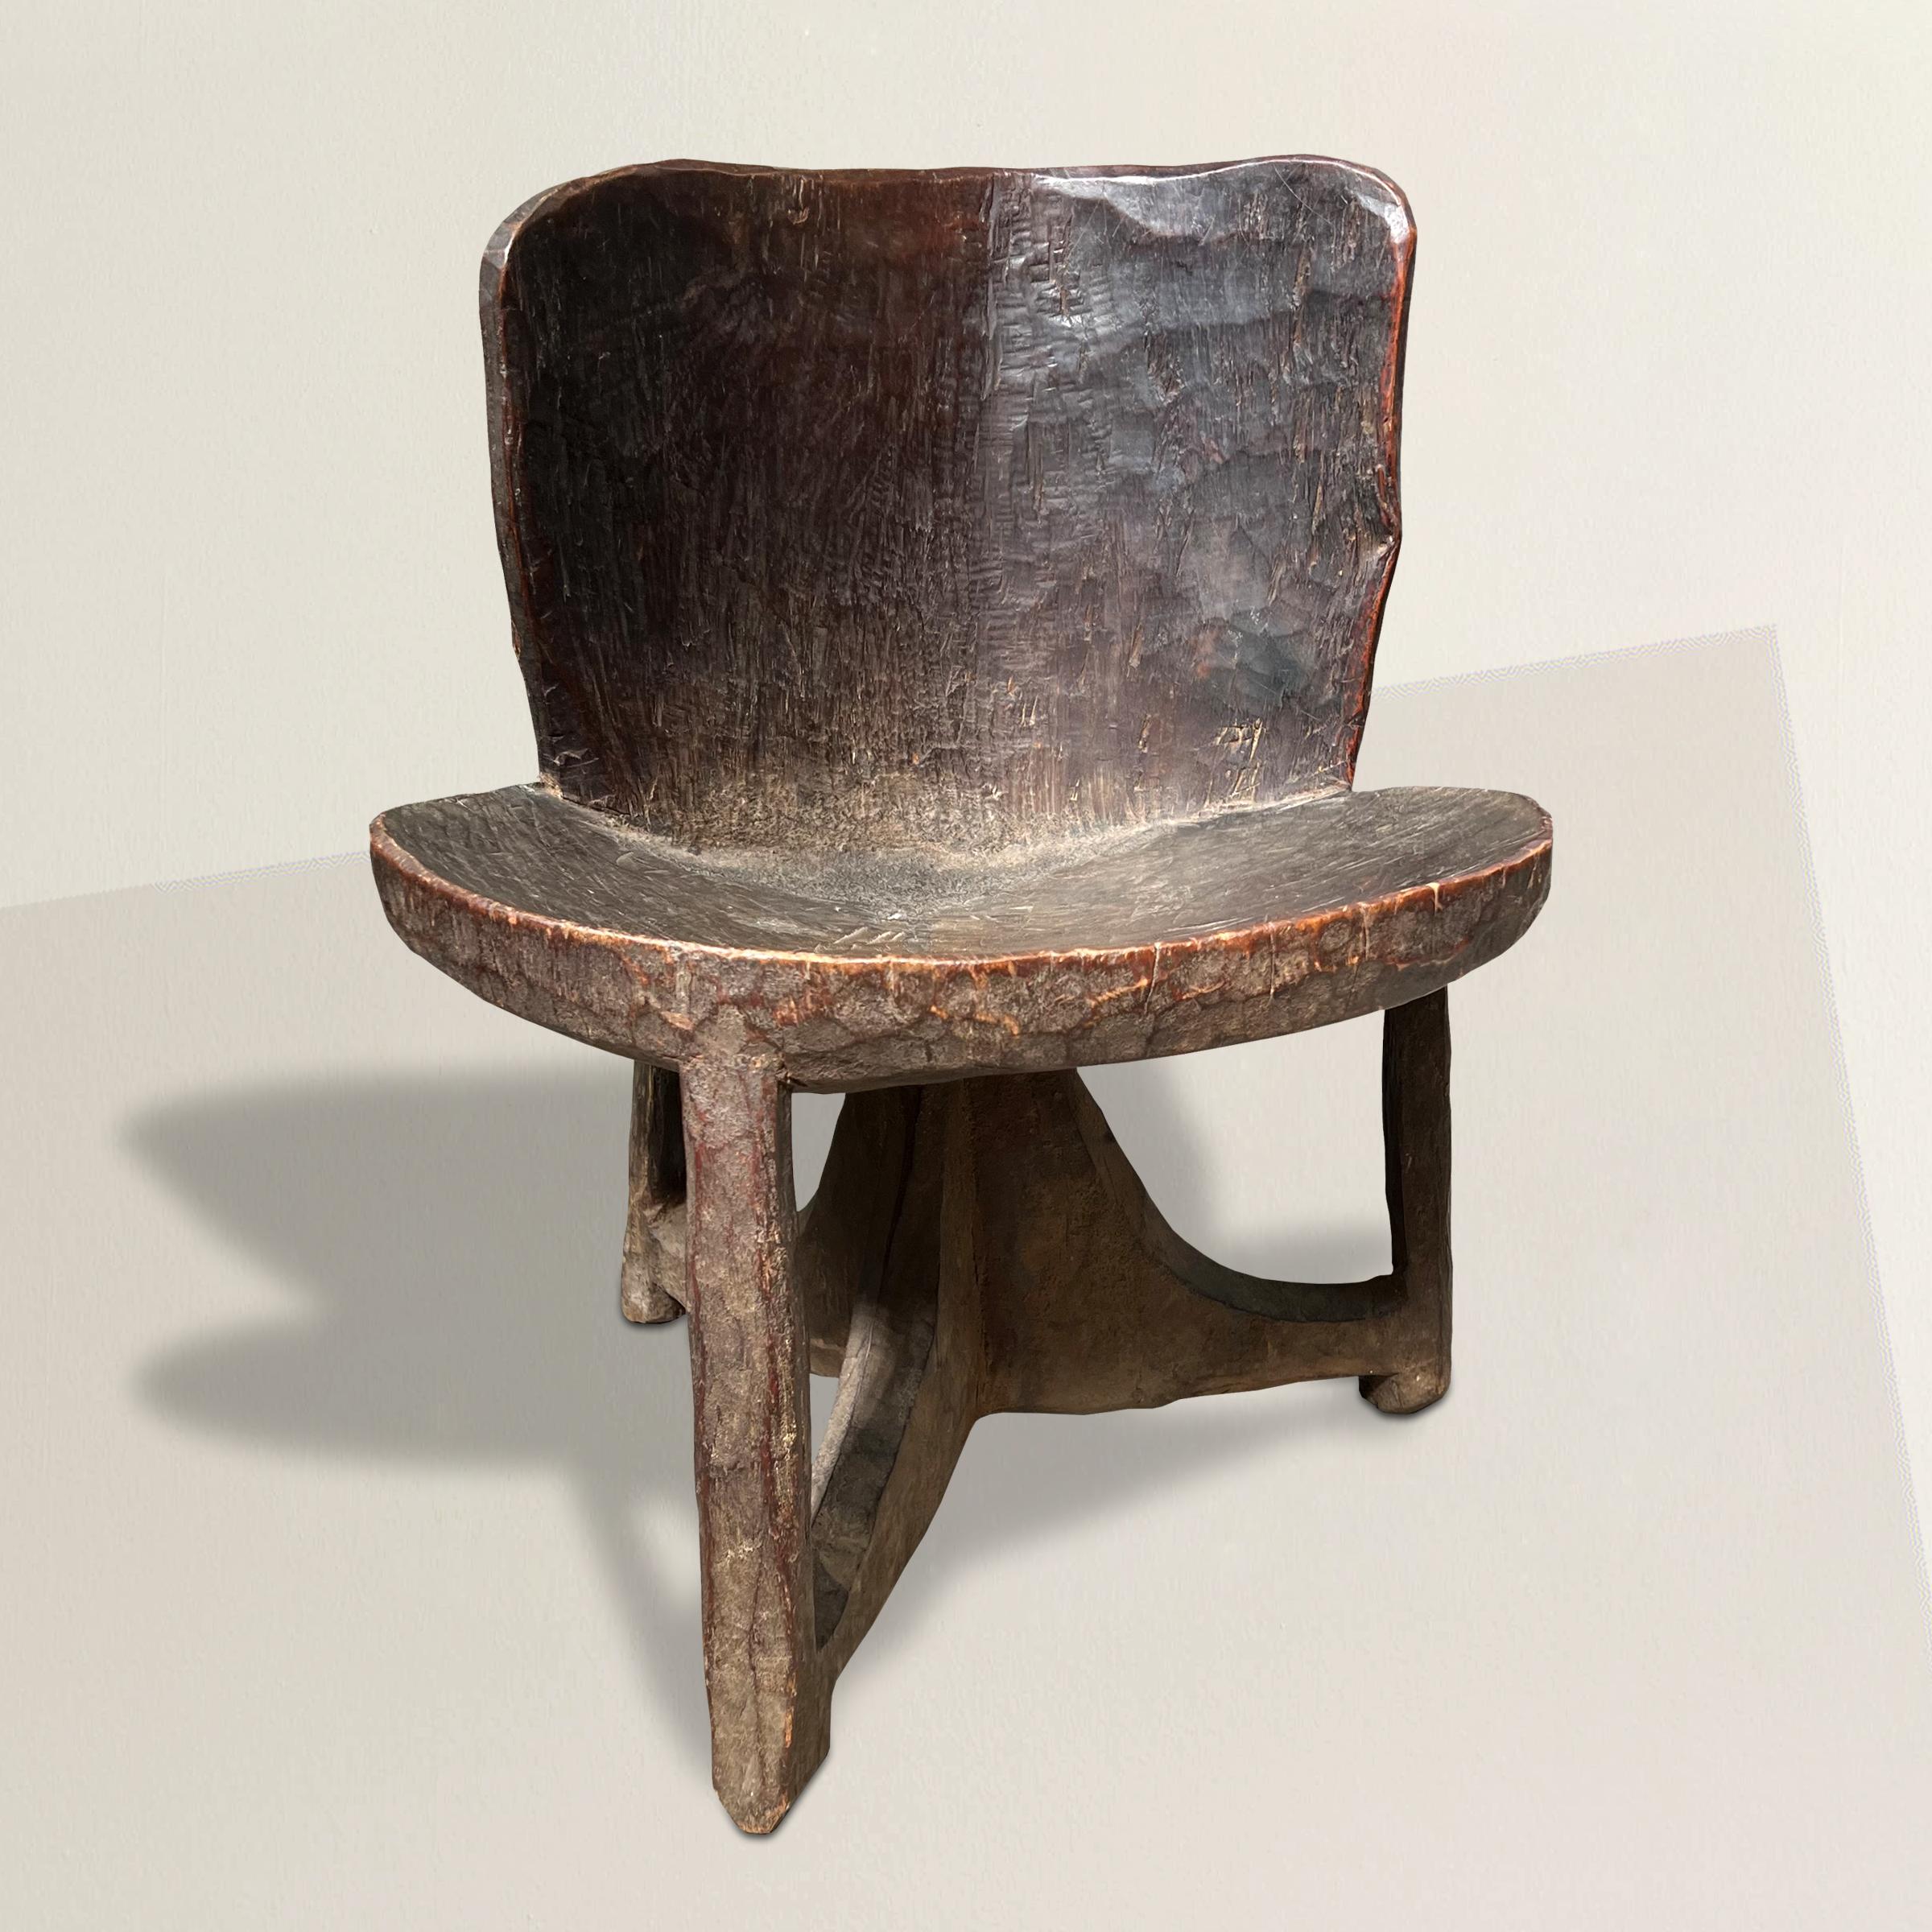 A striking and rare early 20th century Ethiopian Gurage Peoples chair with a modernist spirit, carved of a single piece of wood with a curved back and a round convex seat supported by three legs, and with an incredible patina that only time could